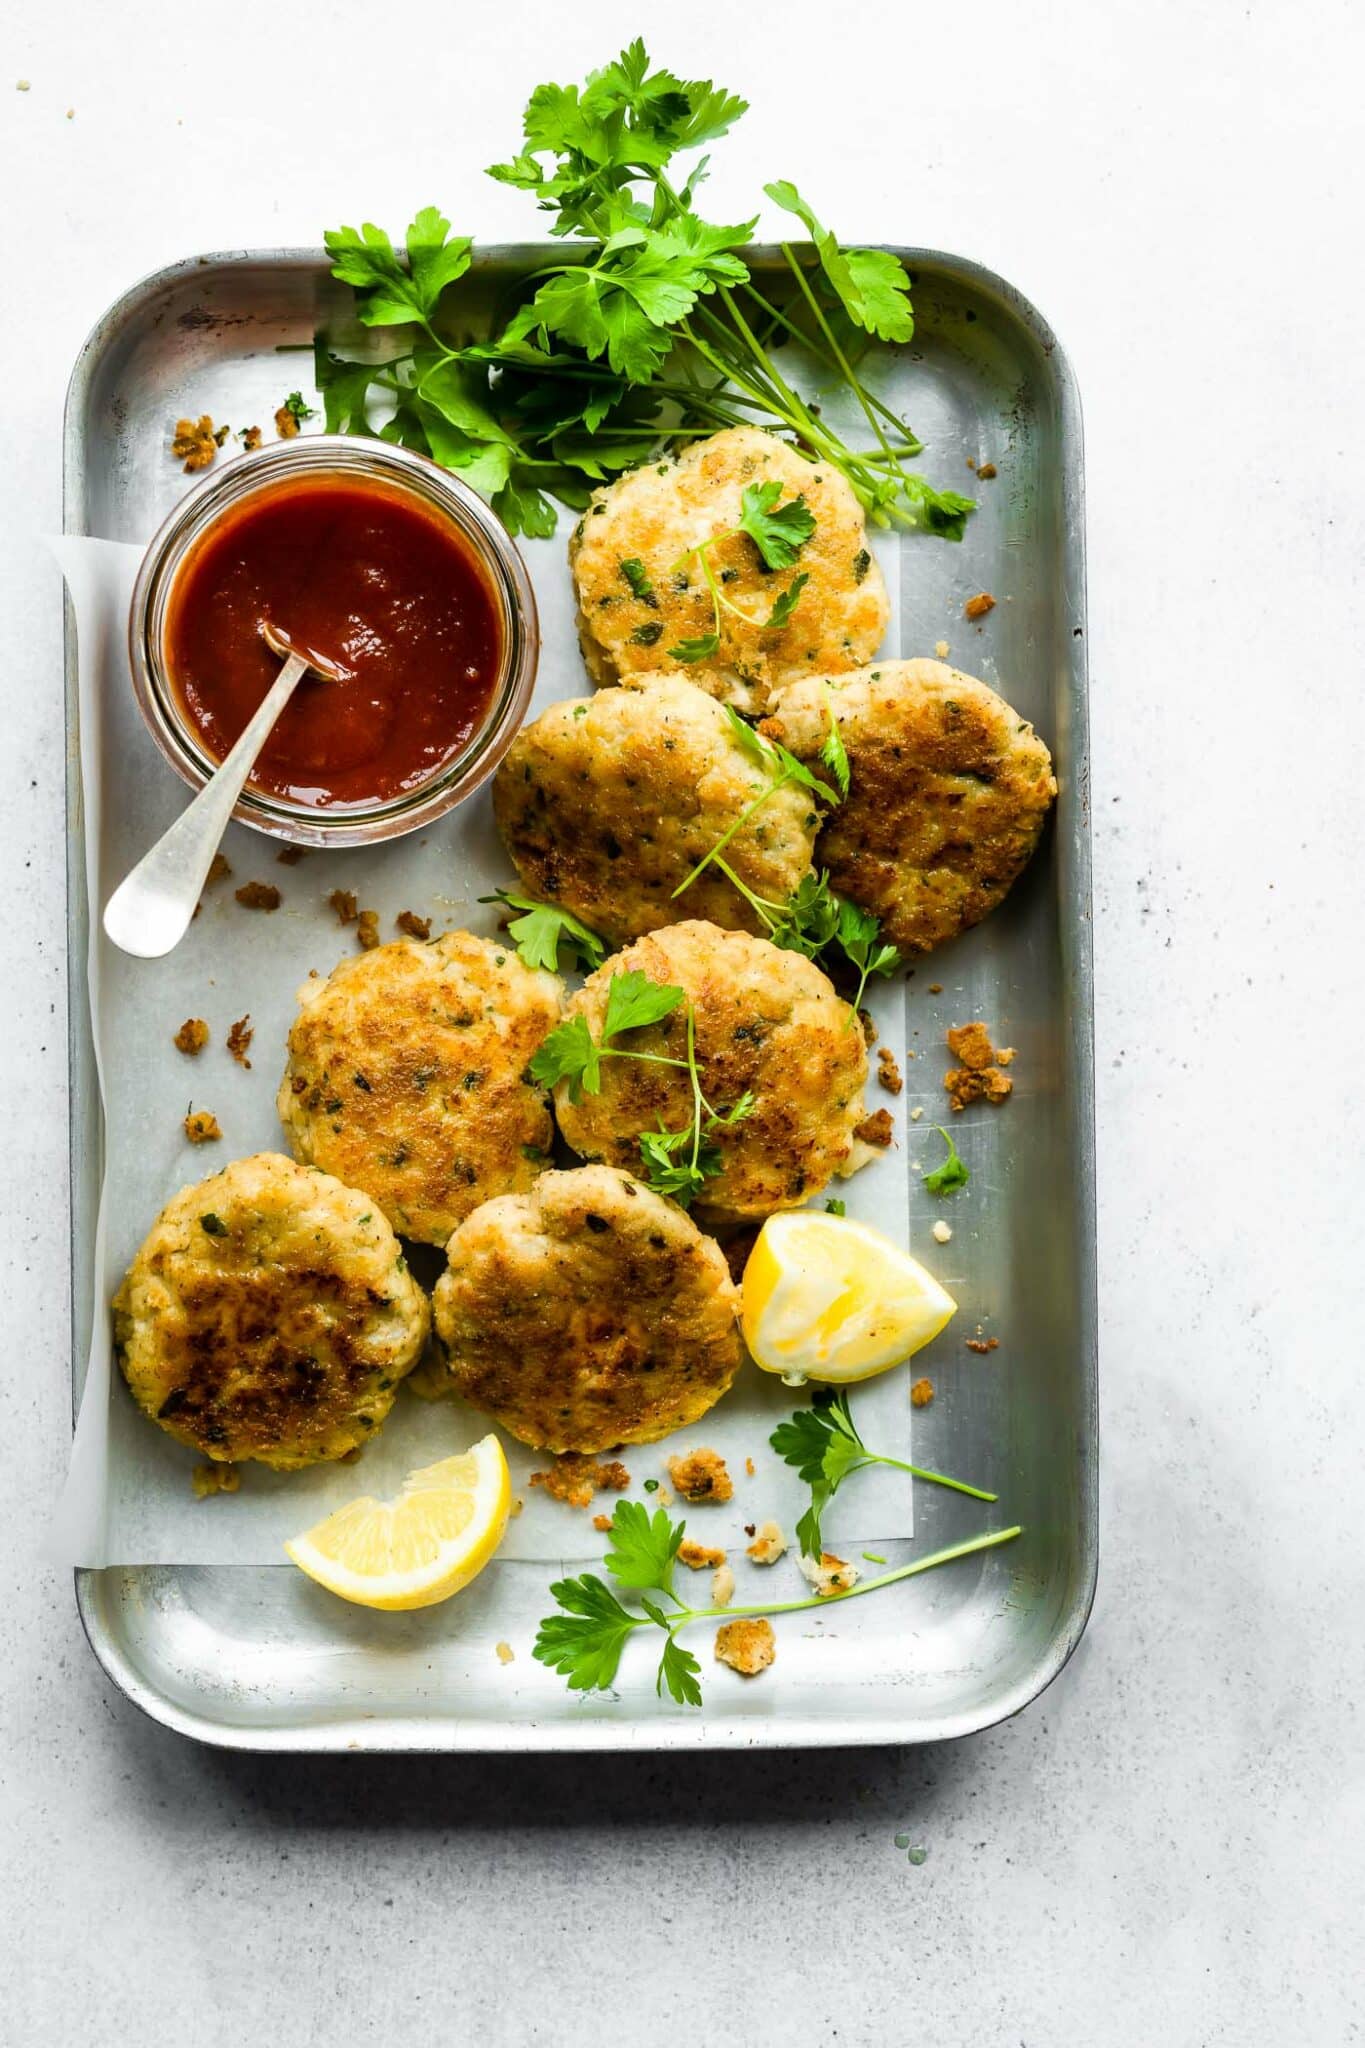 Overhead image of cod cakes layered on a tin casserole dish with a jar of marinara for dipping, and garnished with parsley and fresh lemons.